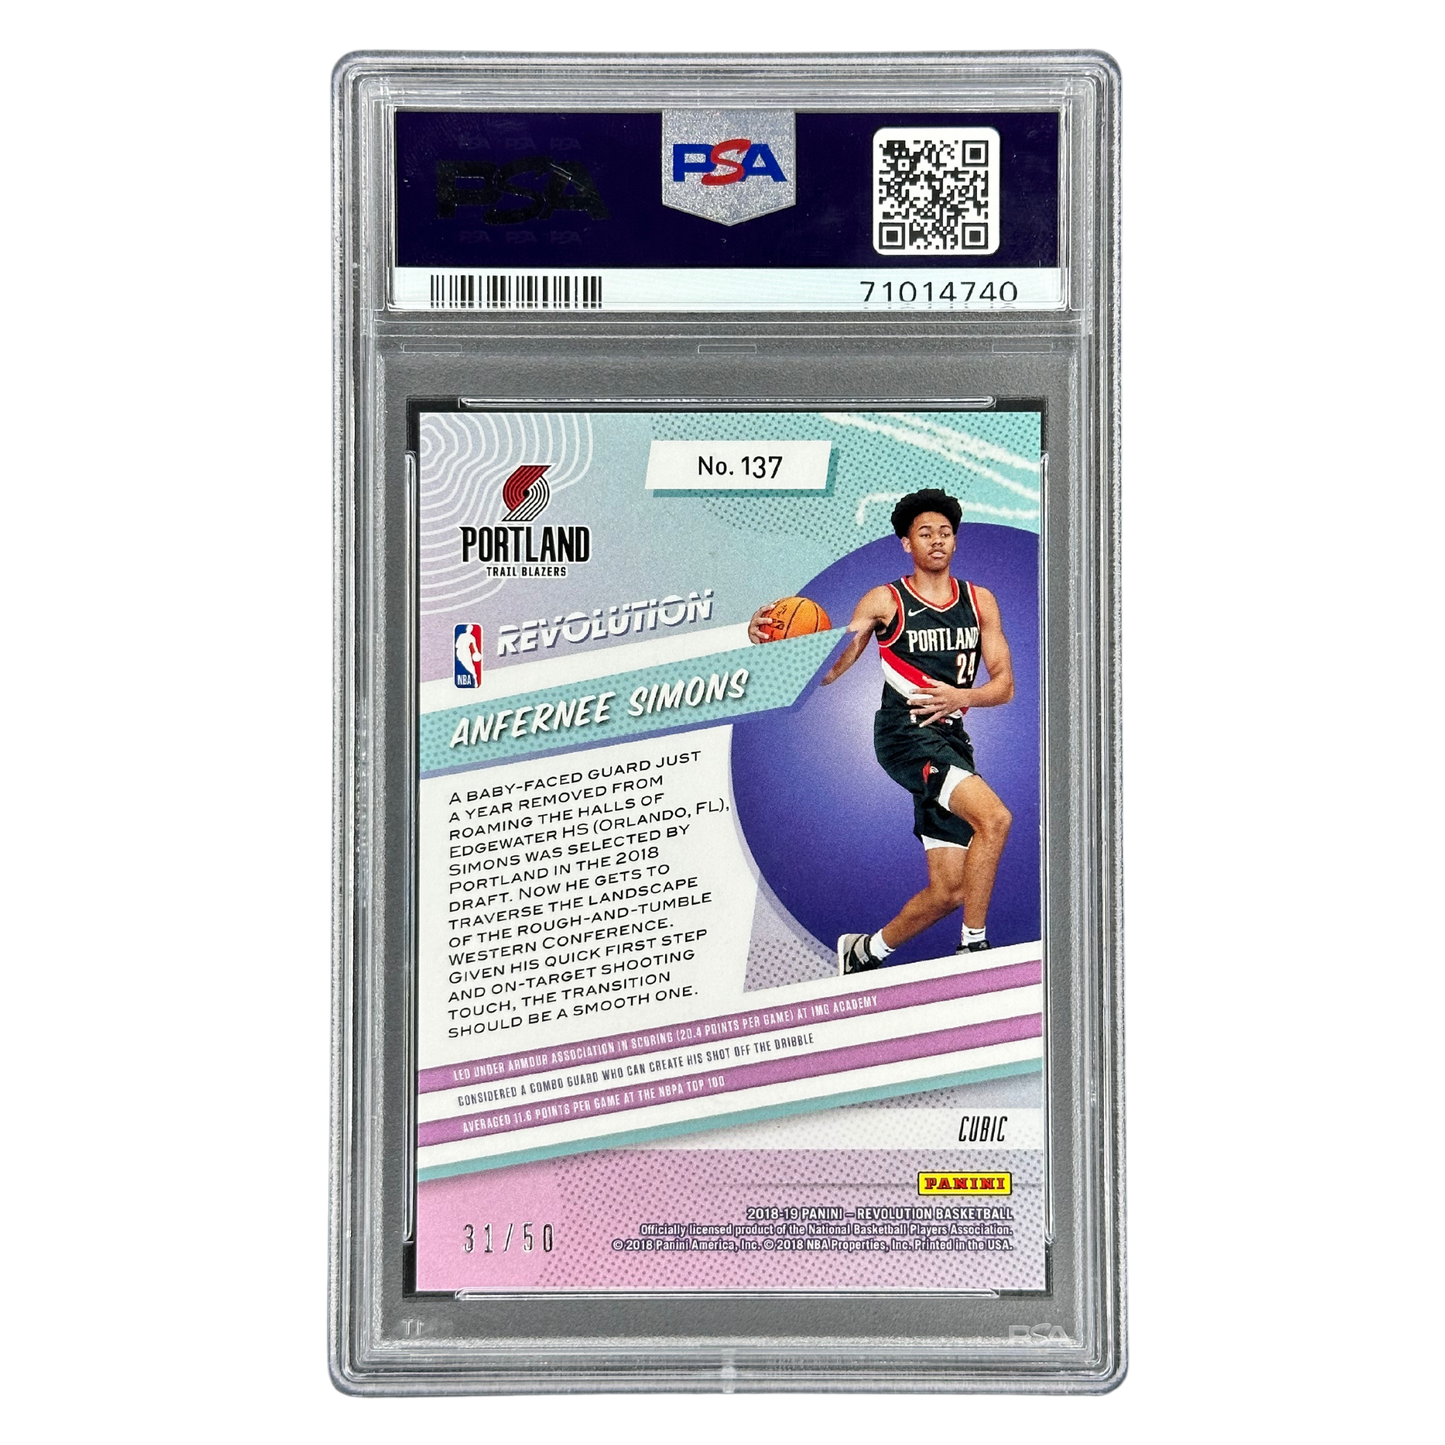 Anfernee Simons 2018 Revolution Cubic 31/50 RC Rookie Card #137